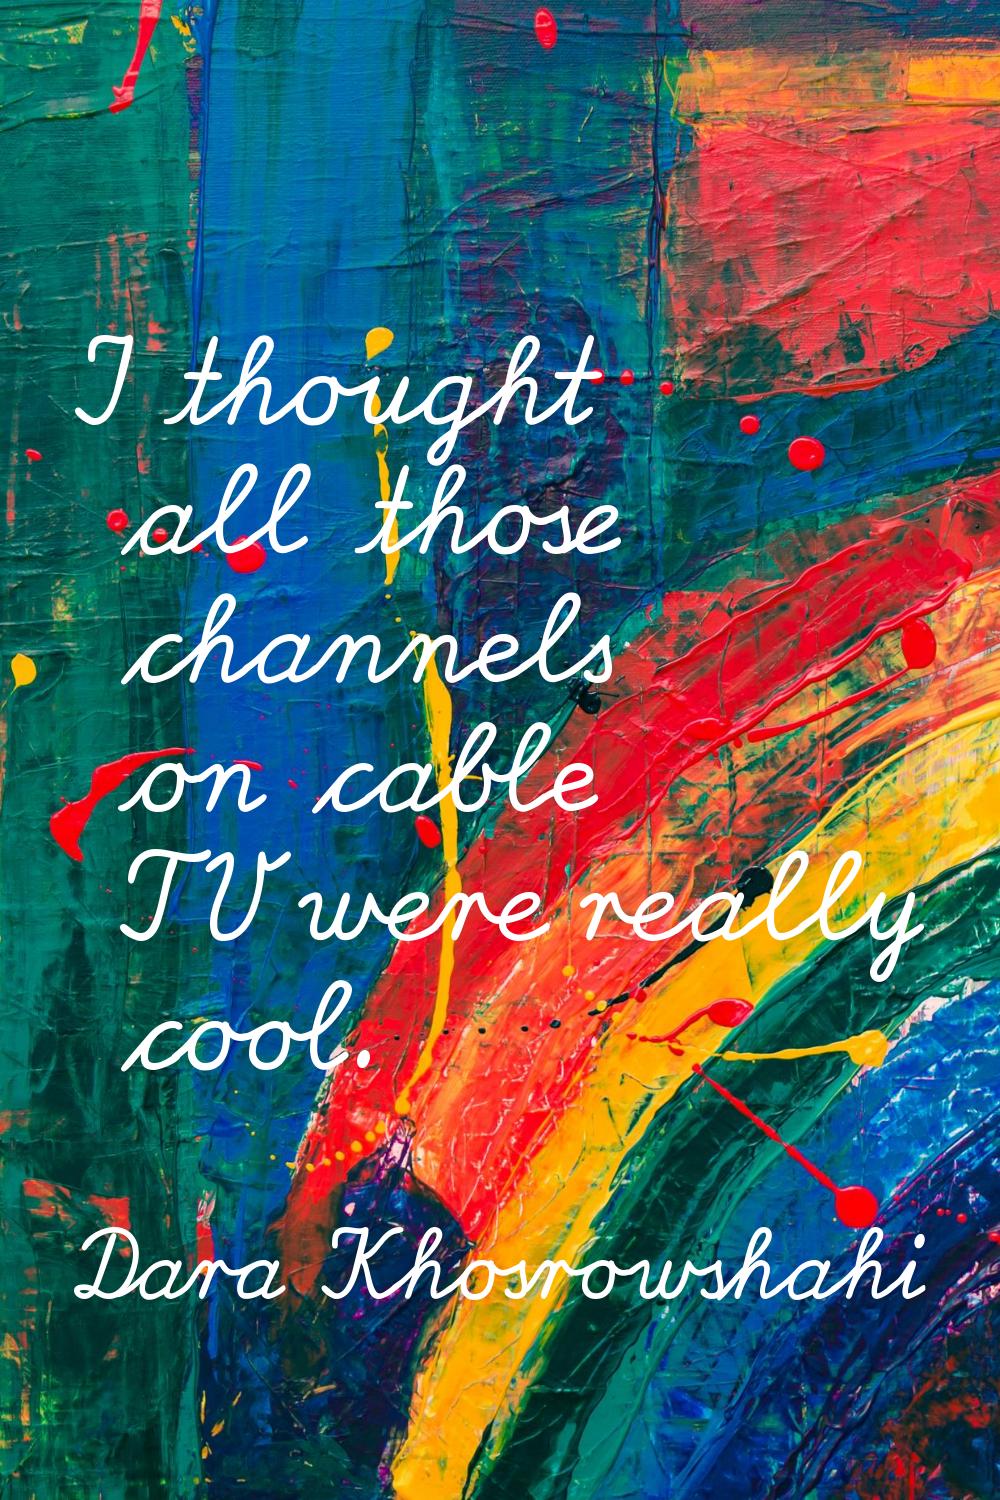 I thought all those channels on cable TV were really cool.